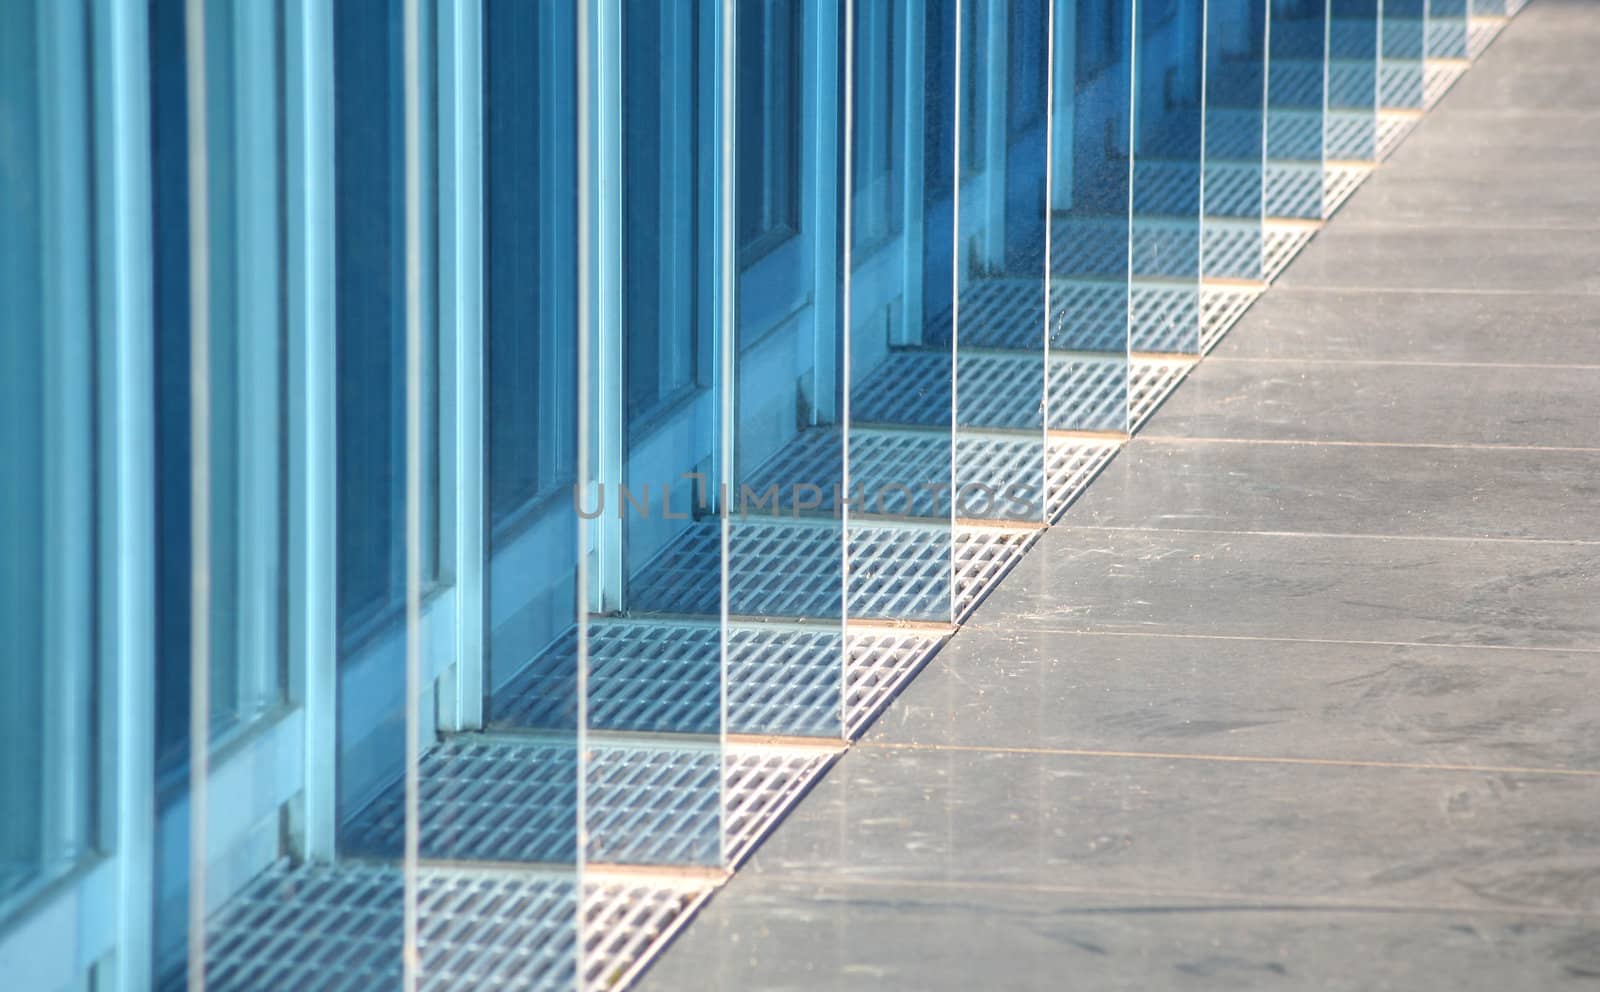 Decorative blue glass plates partition the windows in the ground floor facade of a very modern office building. 